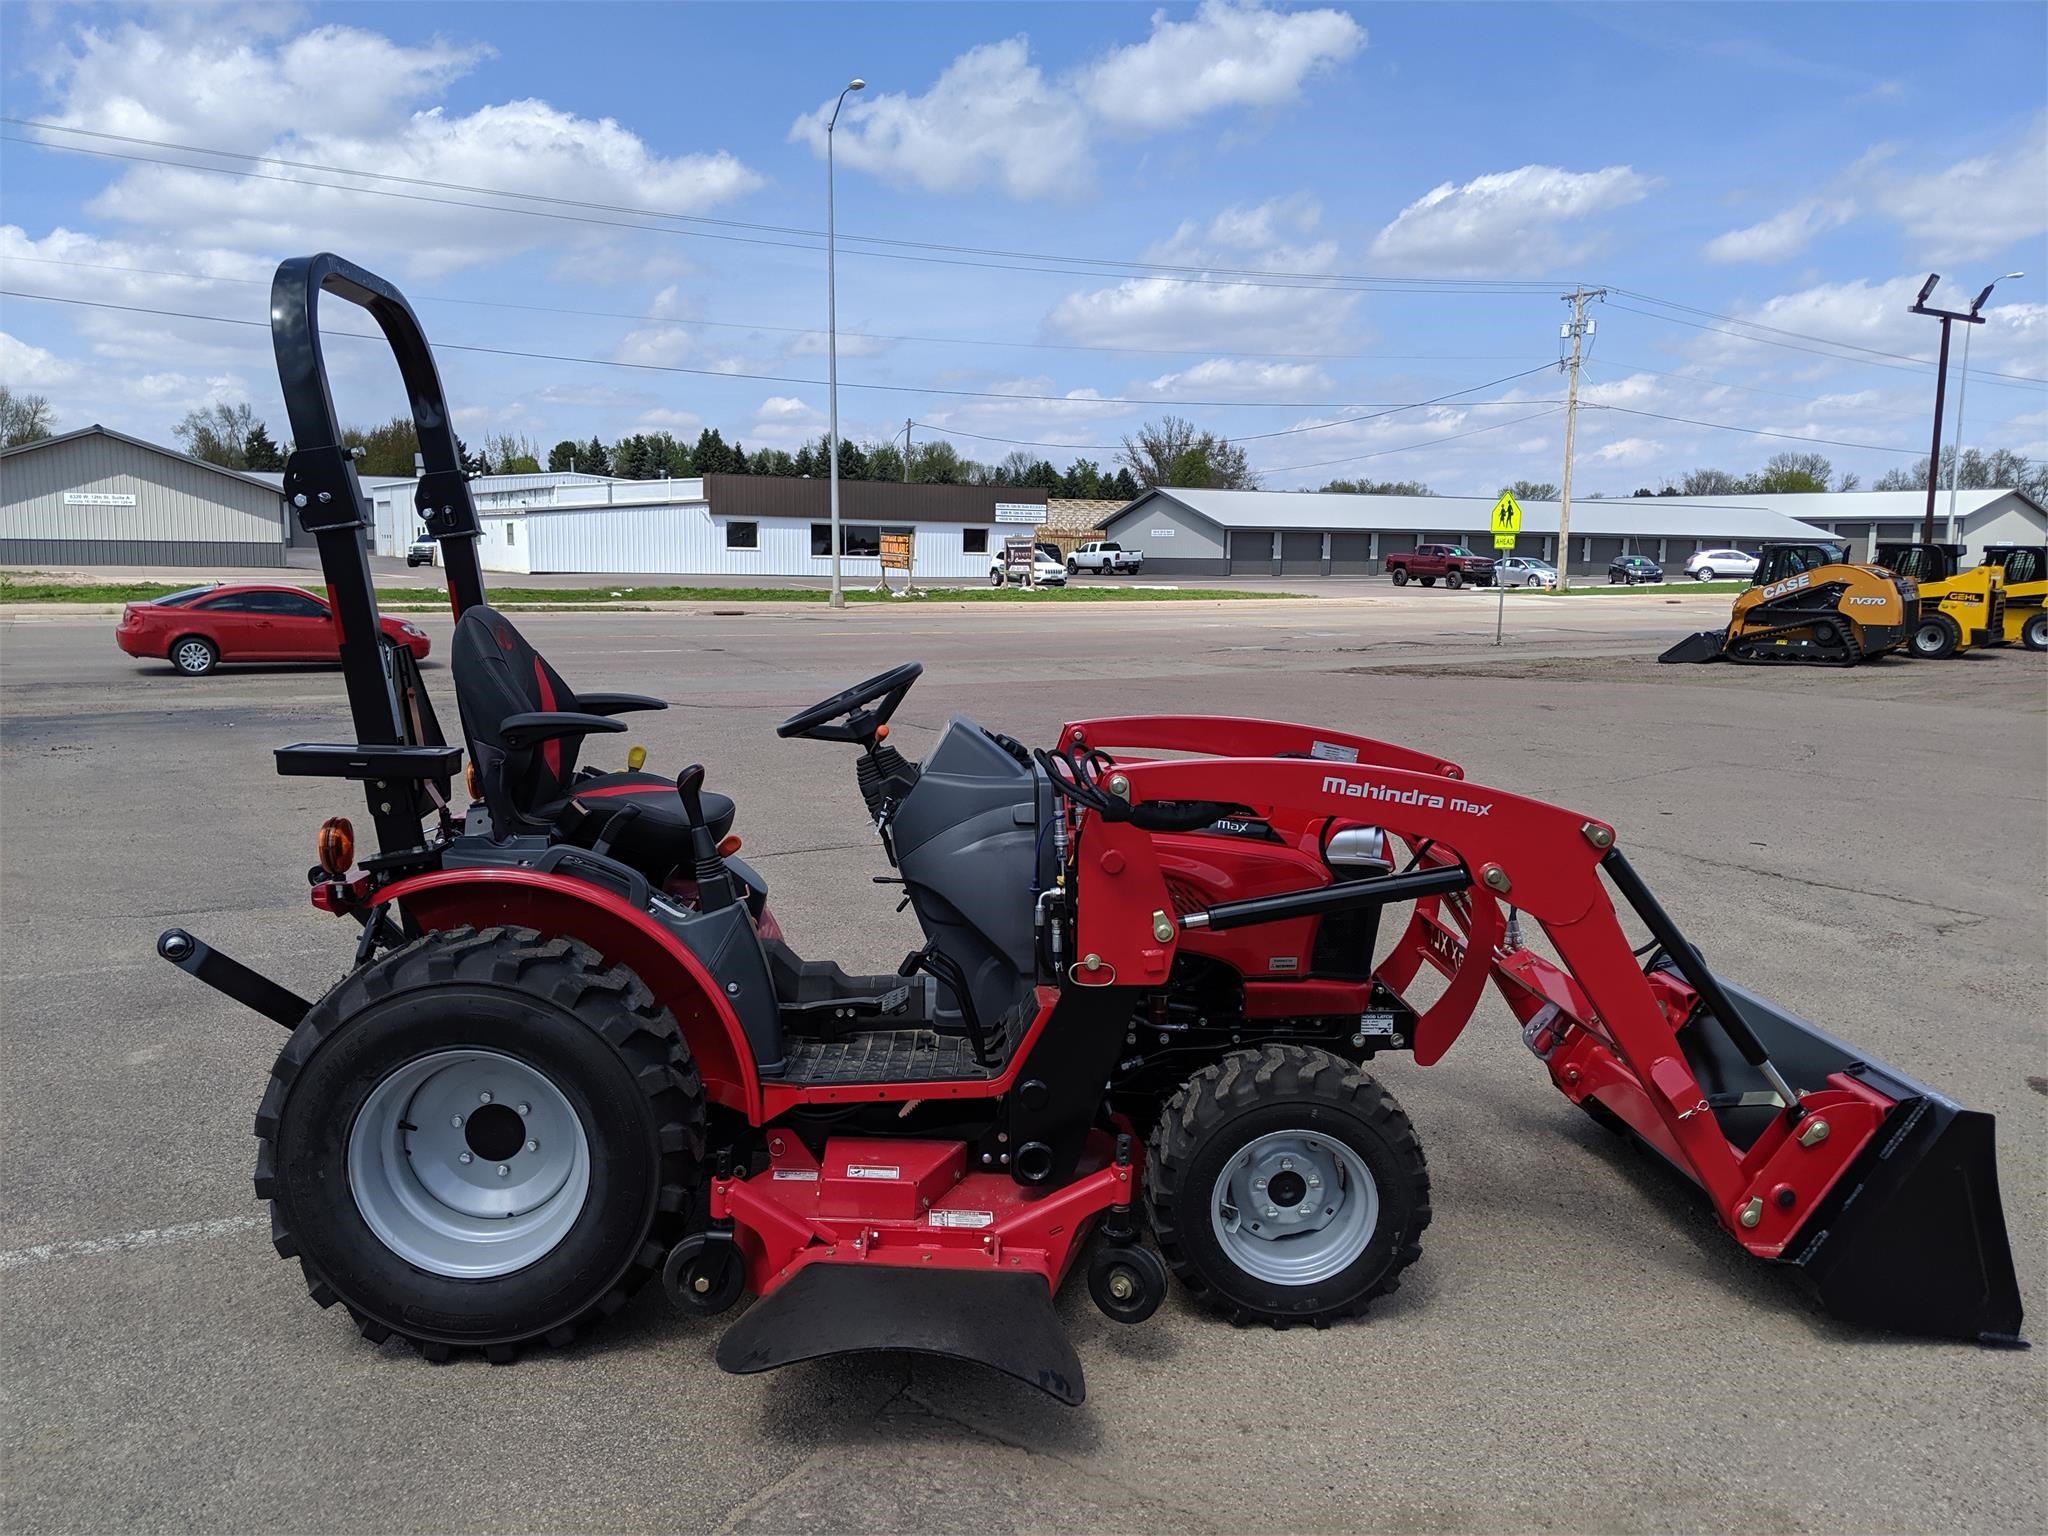 2019 MAHINDRA MAX 26XLT HST For Sale in Sioux Falls, South Dakota | www ...